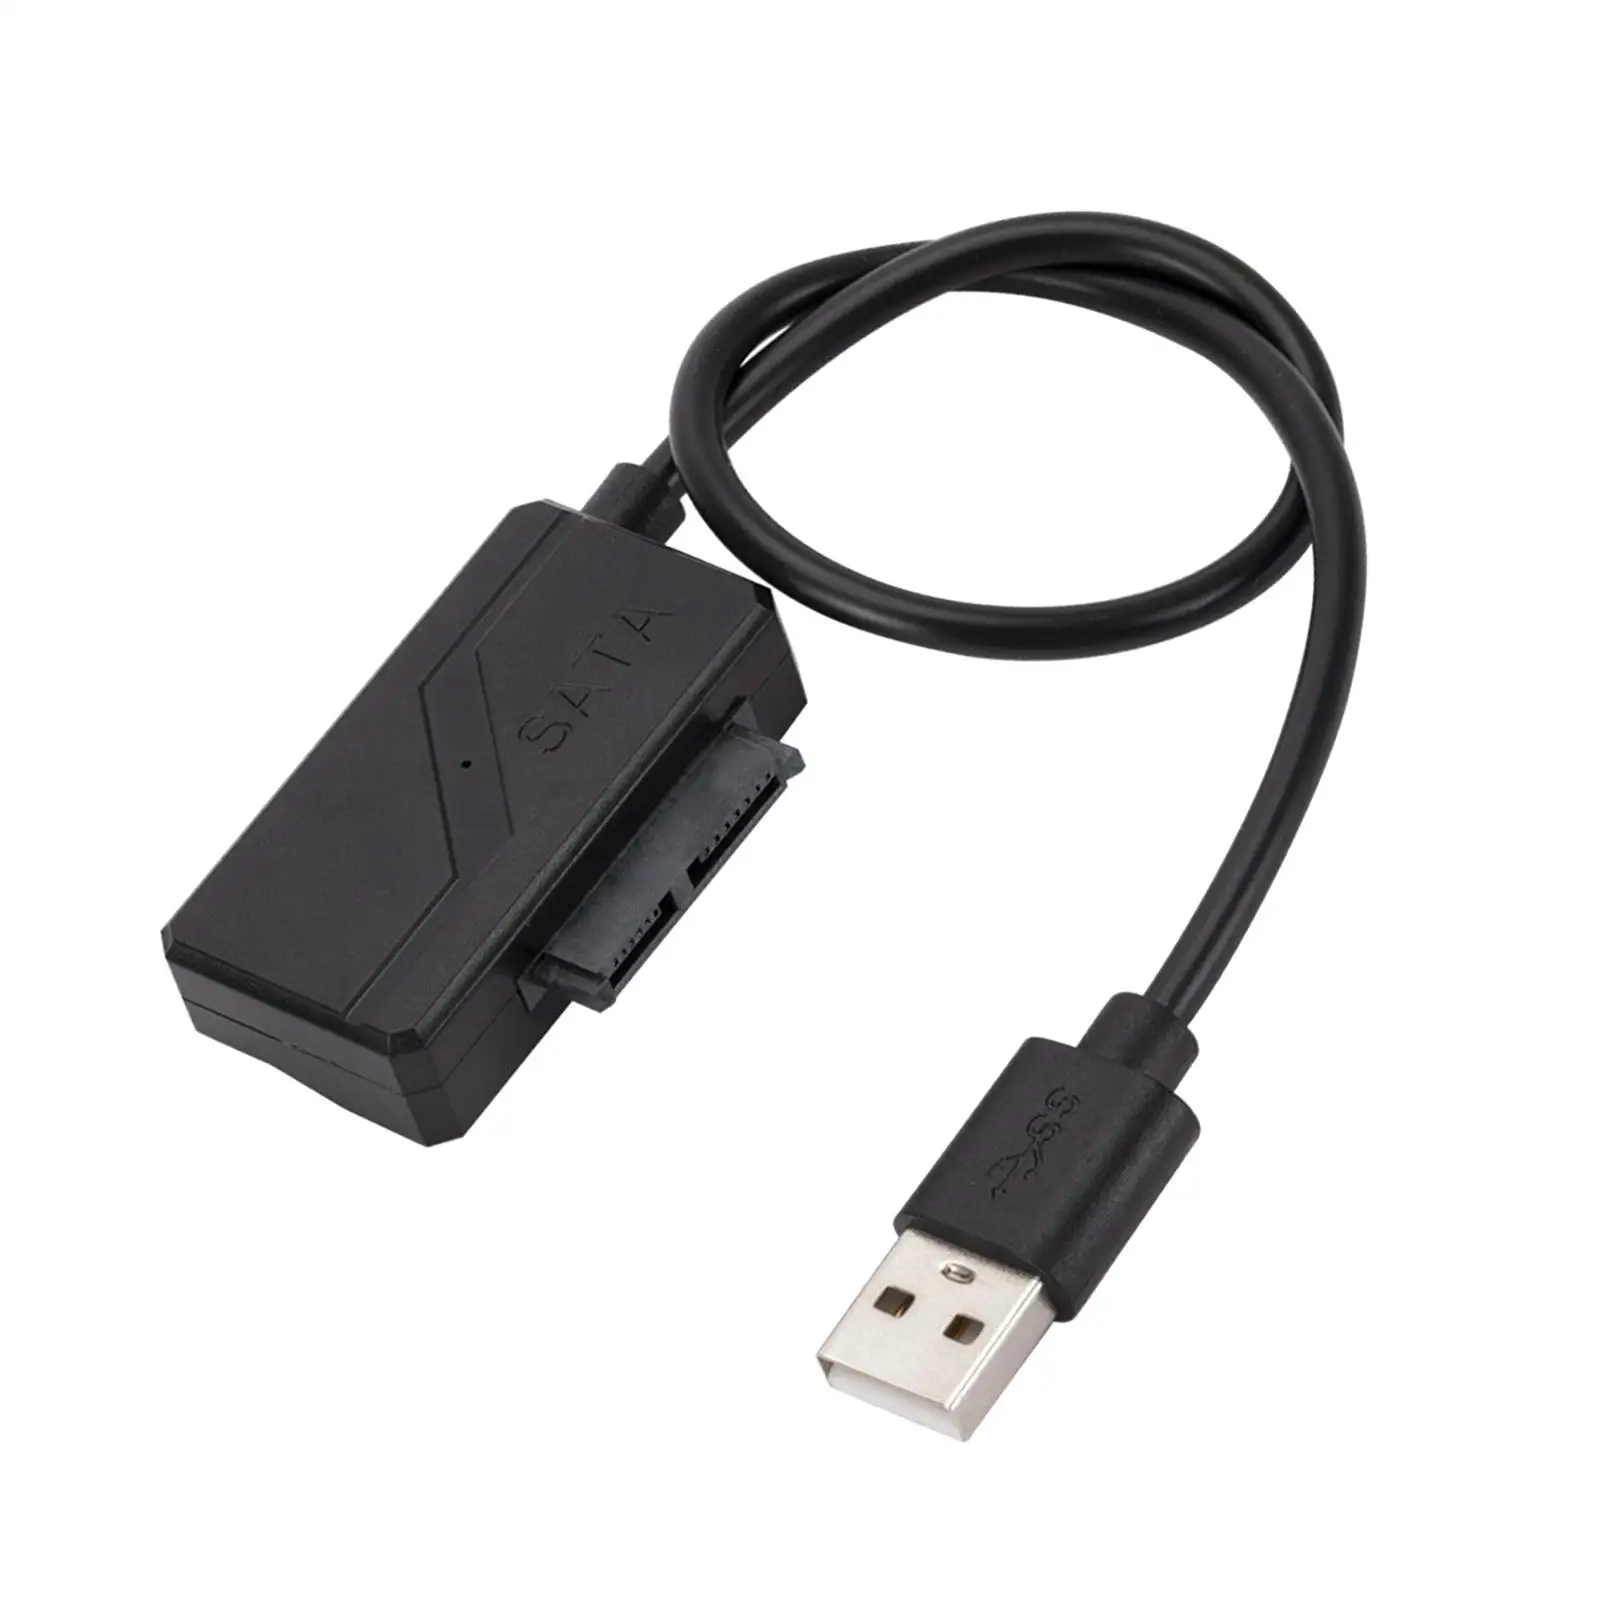 USB 2.0 to SATA 7+6 13Pin Adapter Cable Plug and Play Transfer Cord Converter for Laptop CD/DVD ROM Accessories